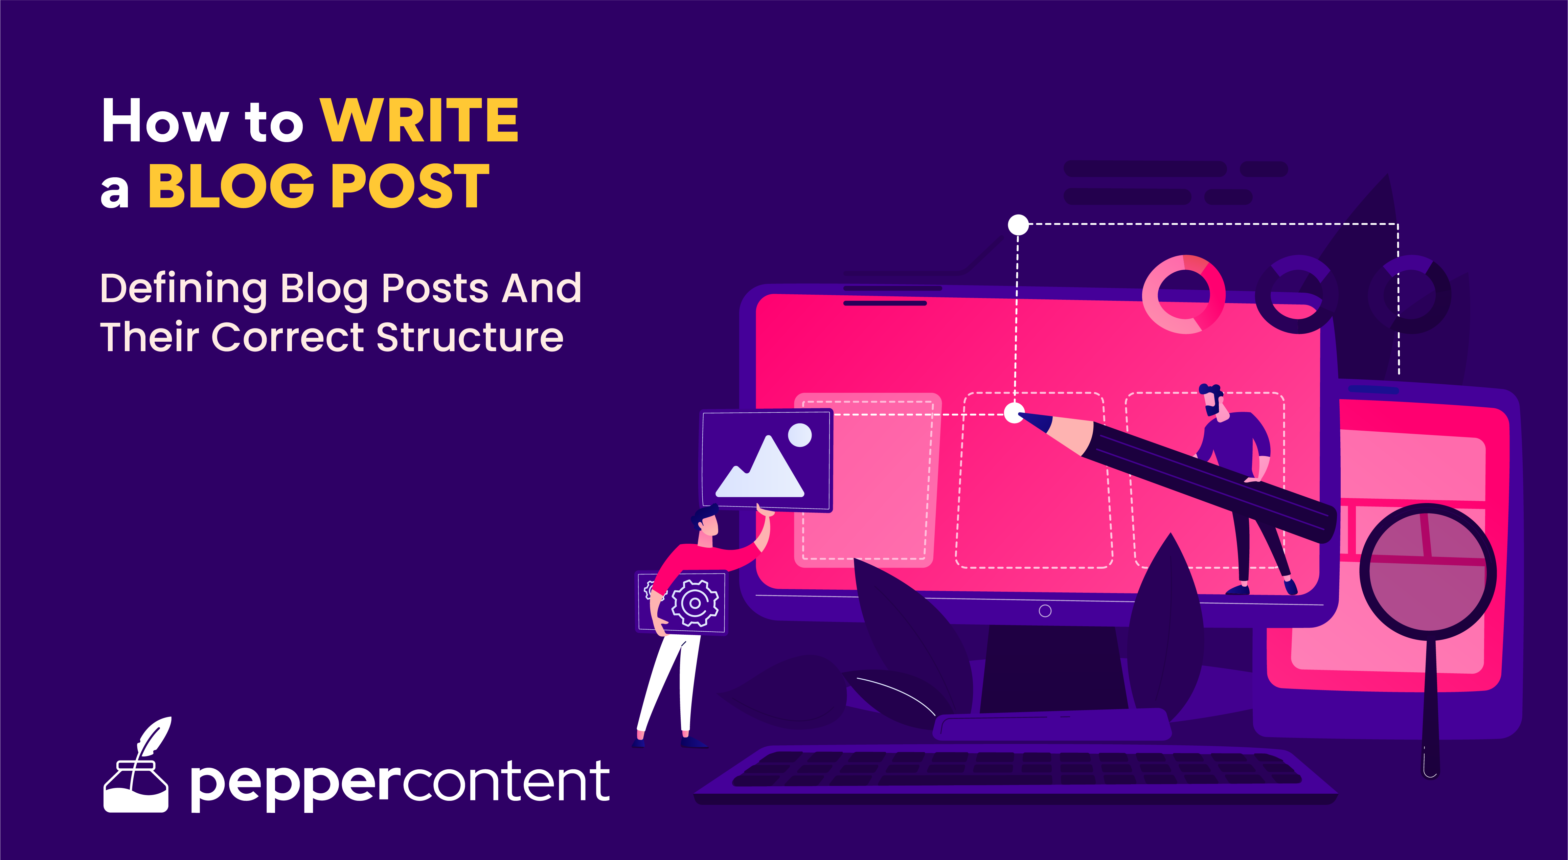 Defining Blog Posts and their Correct Structure